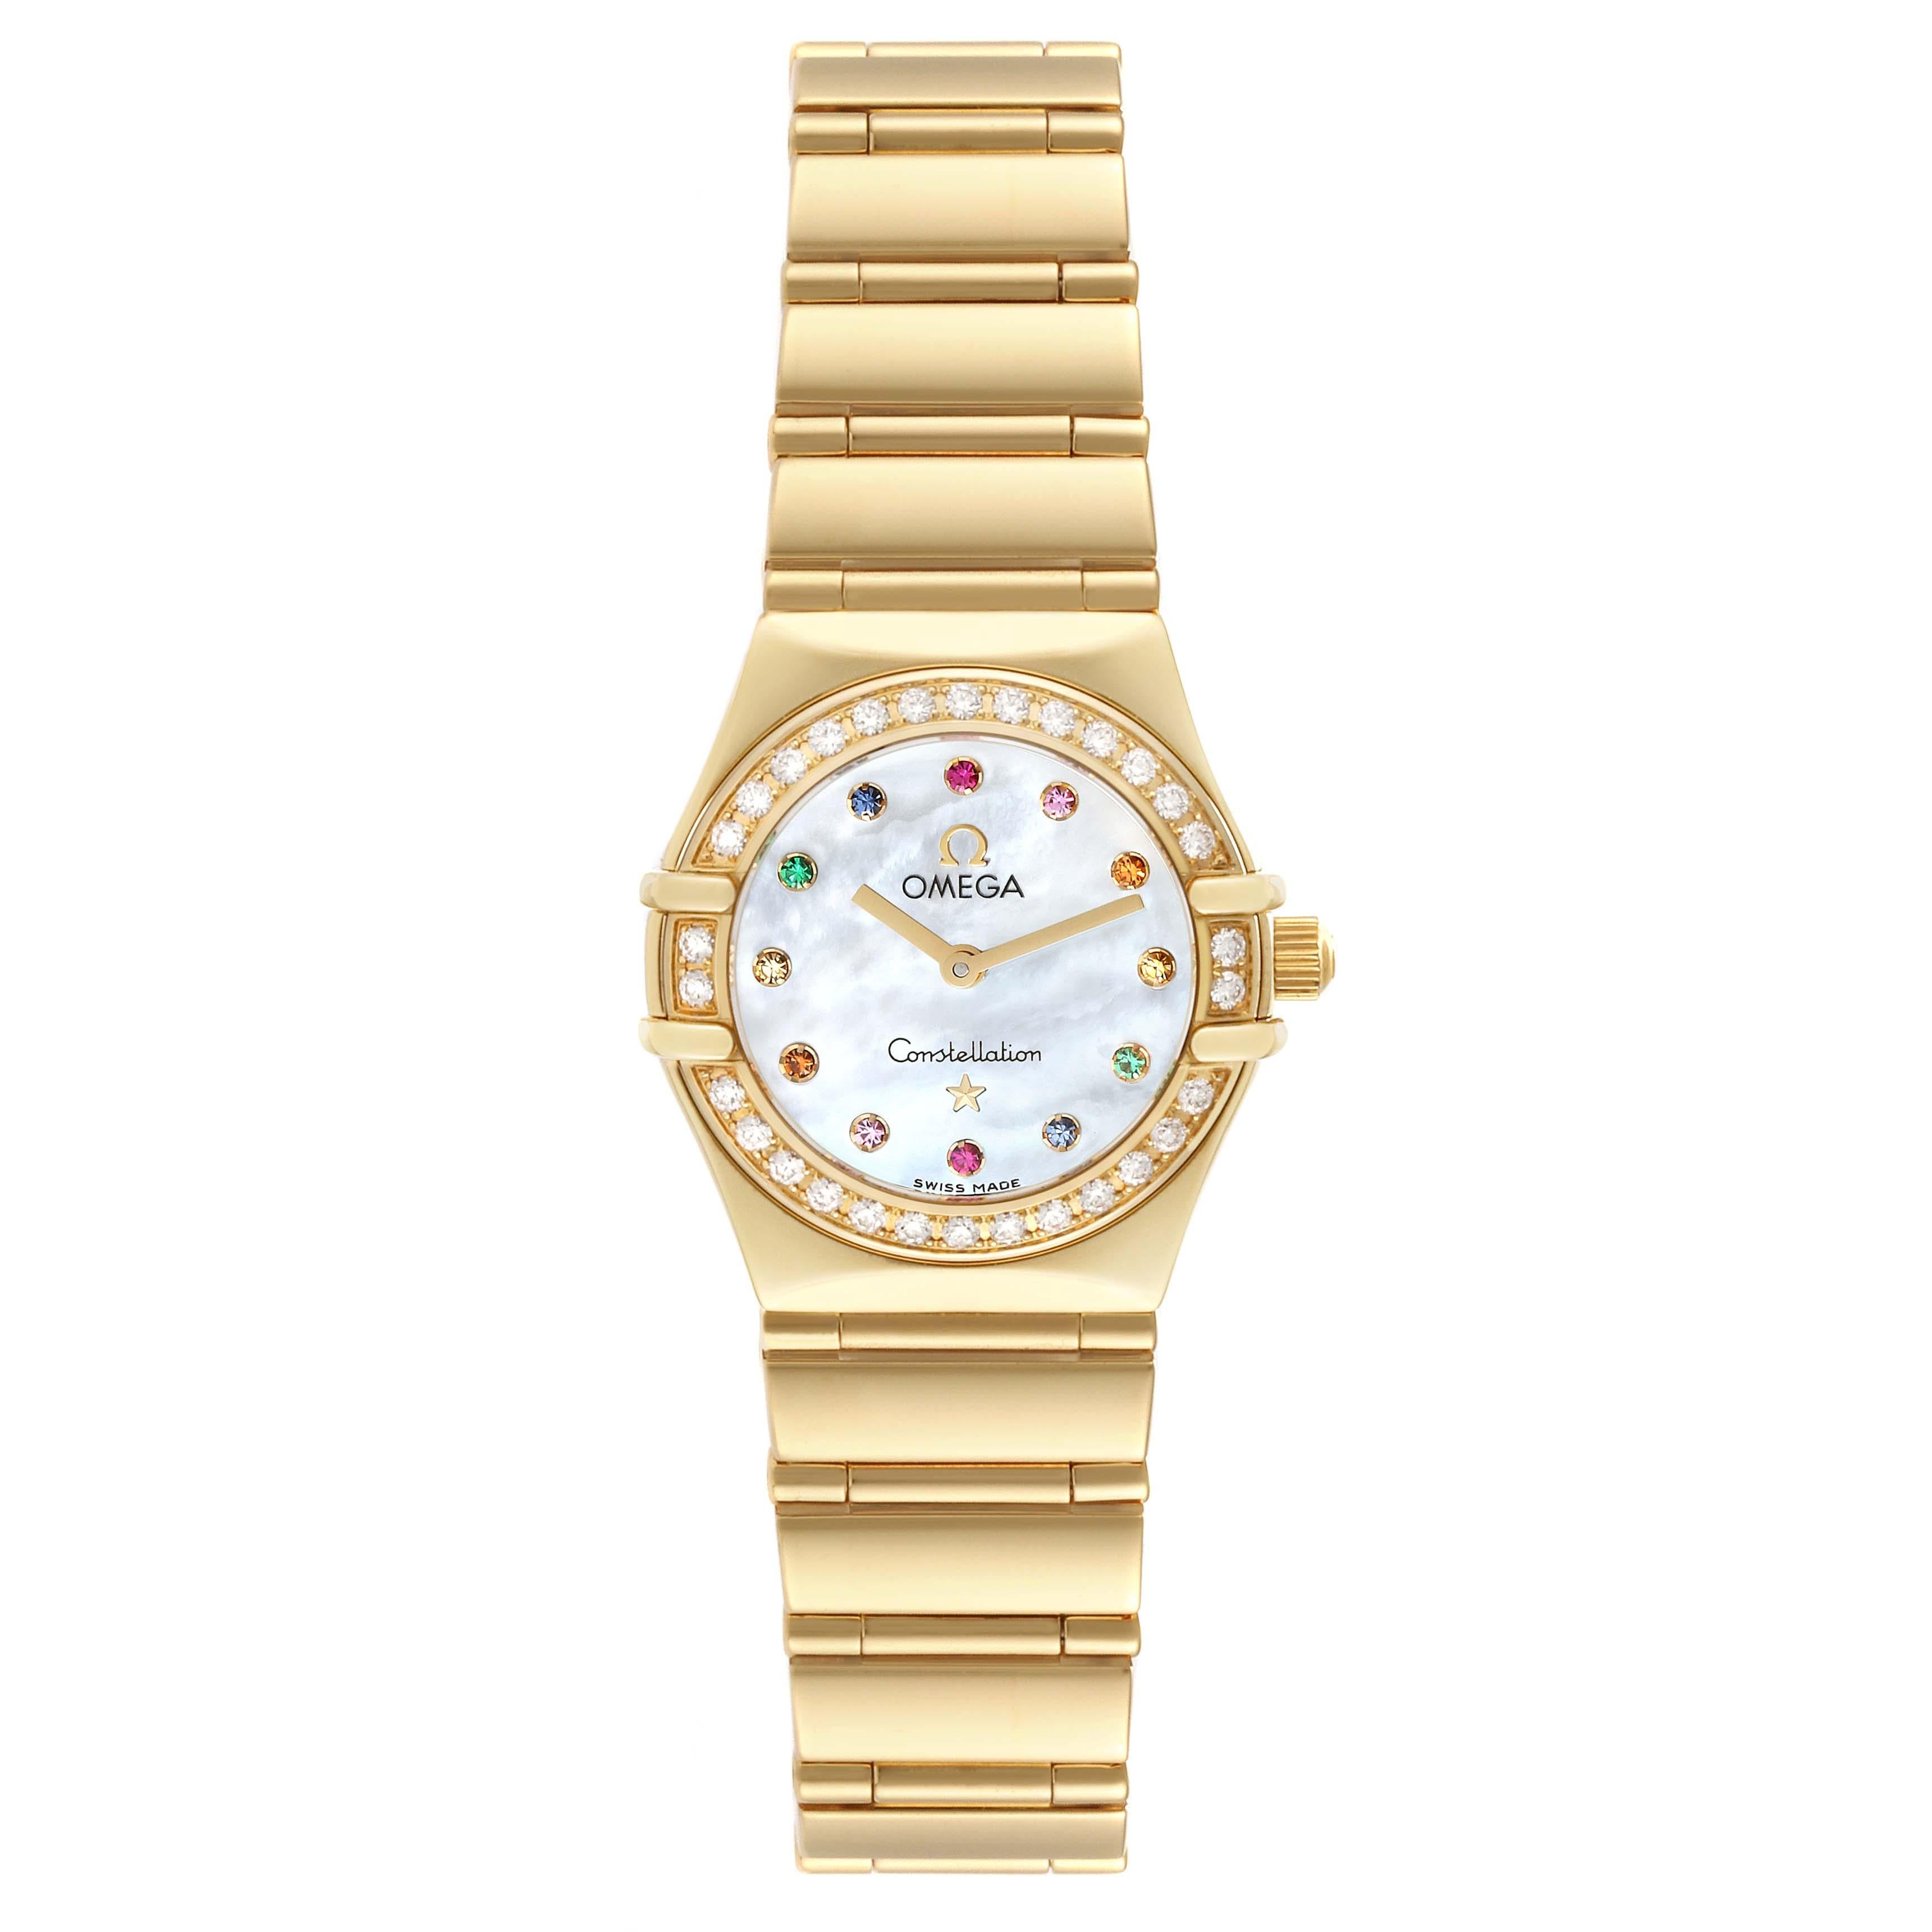 Omega Constellation Iris Yellow Gold Mother Of Pearl Multi Stone Diamond Ladies Watch 1164.79.00. Quartz movement. 18k yellow gold round case 22.5 mm in diameter. Original Omega factory diamond bezel. Scratch resistant sapphire crystal with